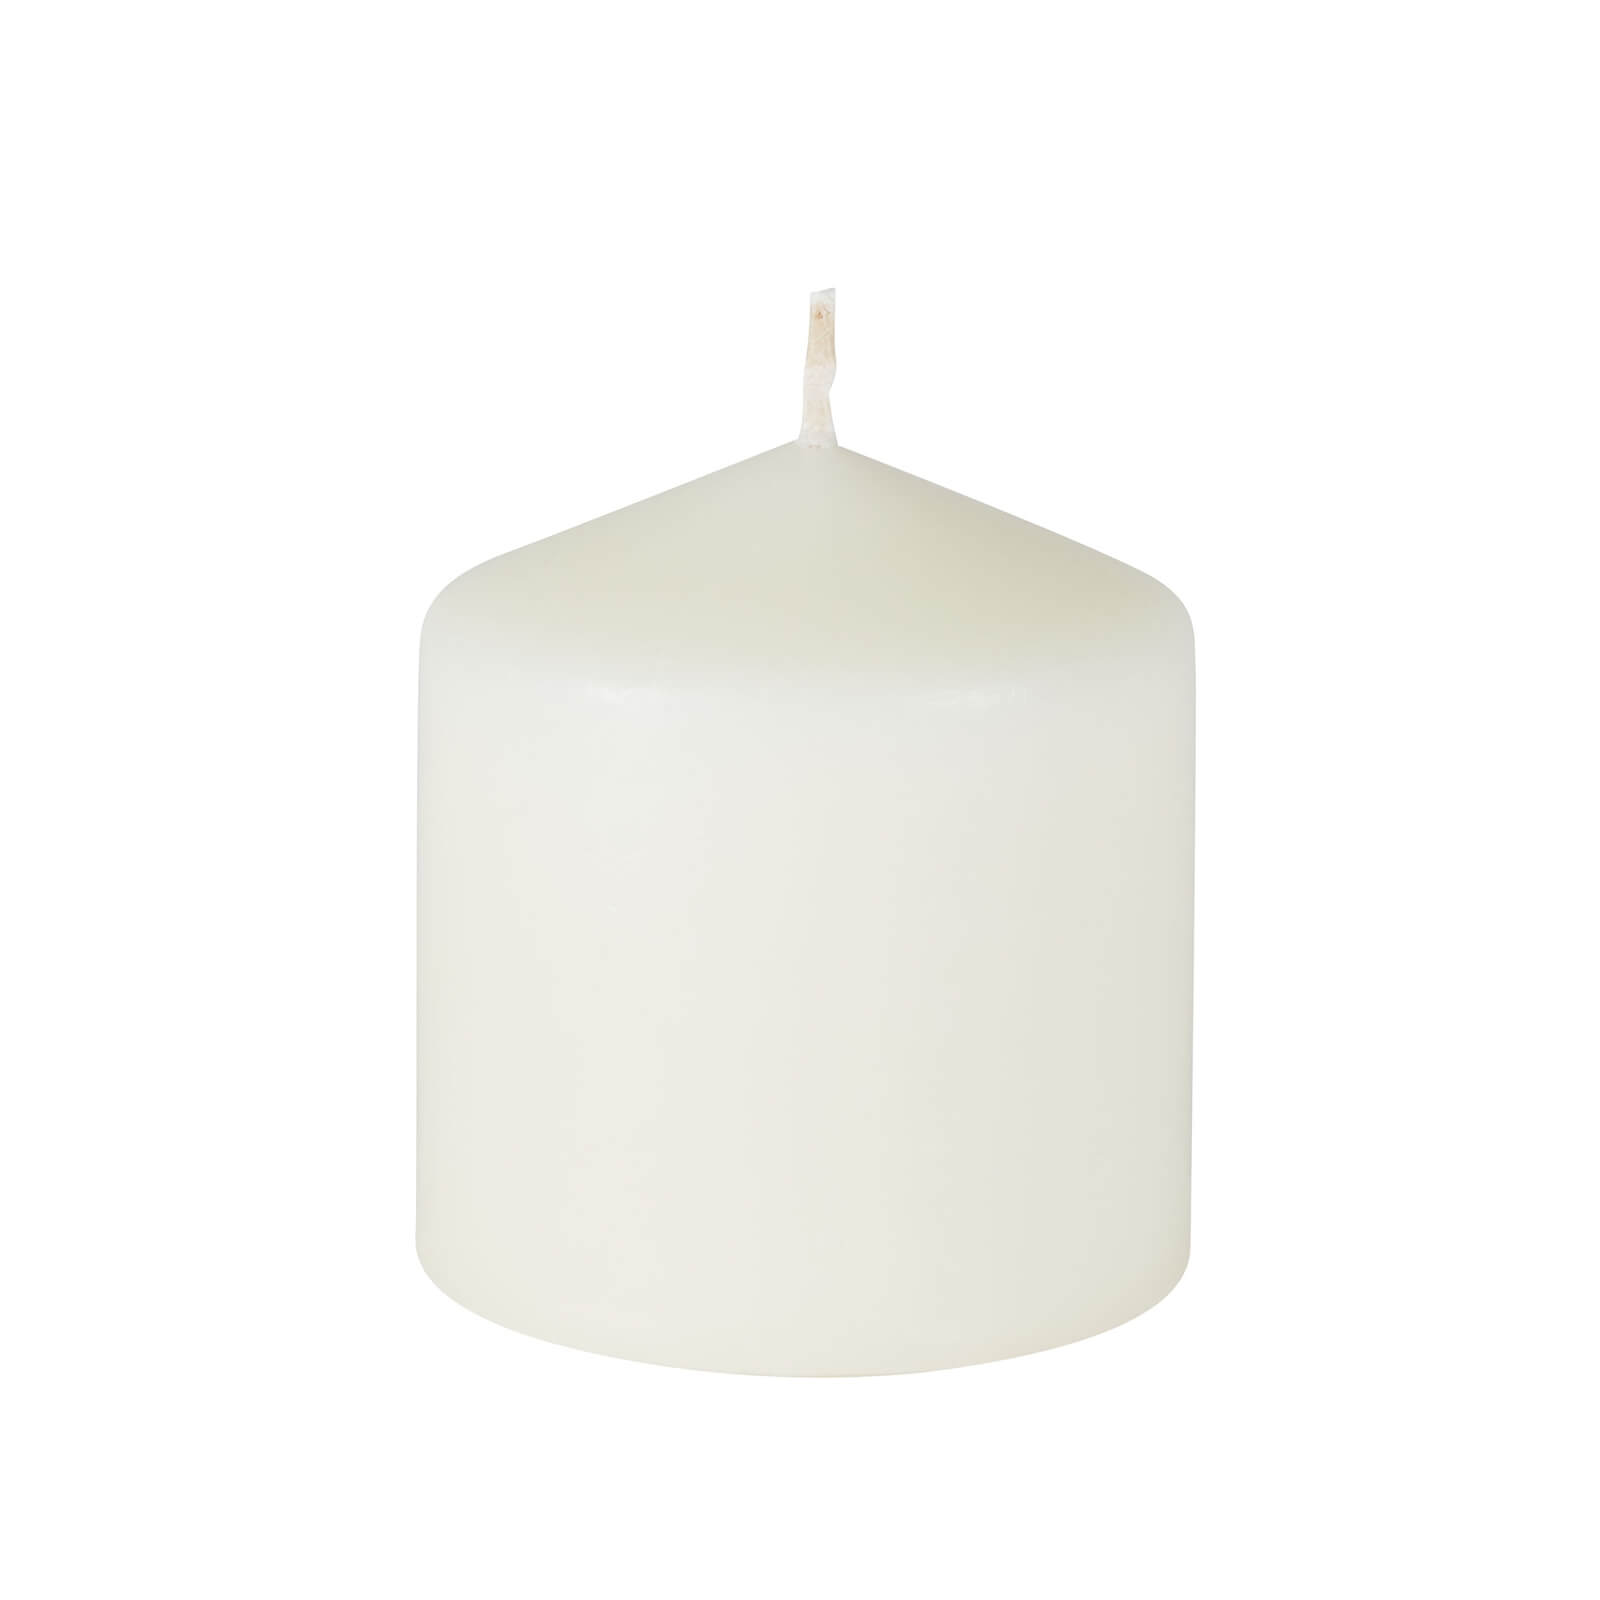 Photo of Small Pillar Candle - Ivory